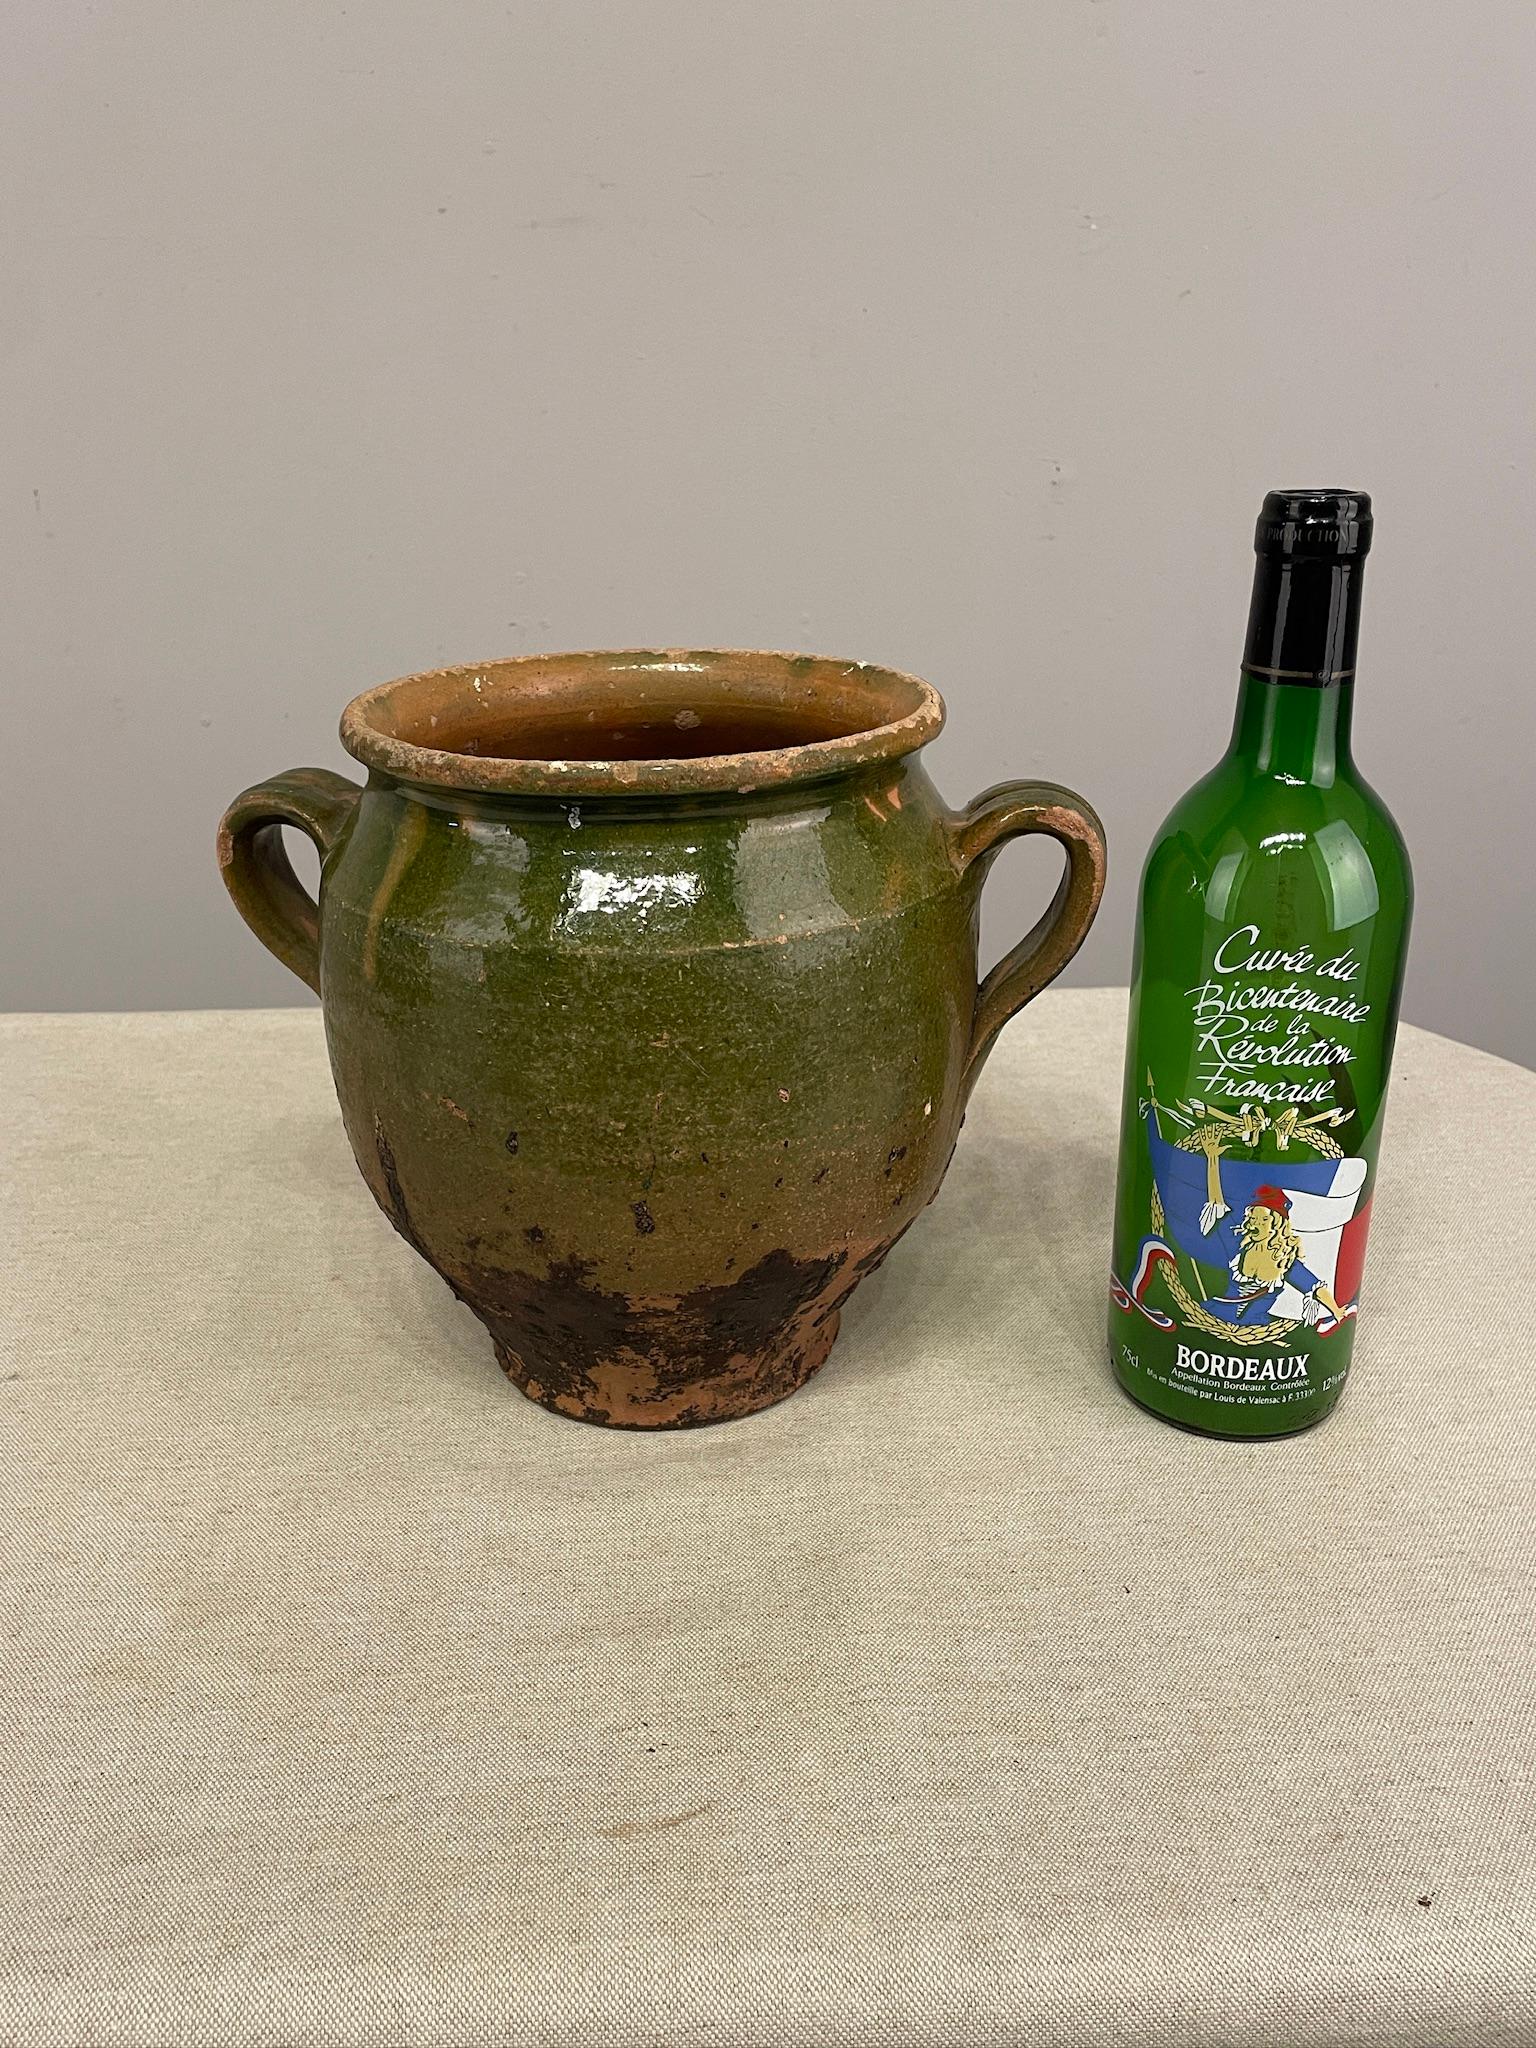 An earthenware green confit pot from the Southwest of France with traditional green glaze colors . Minor chips and losses to glaze.
These ordinary earthenware vessels were once used daily in the French country home and have beautiful rustic glazes